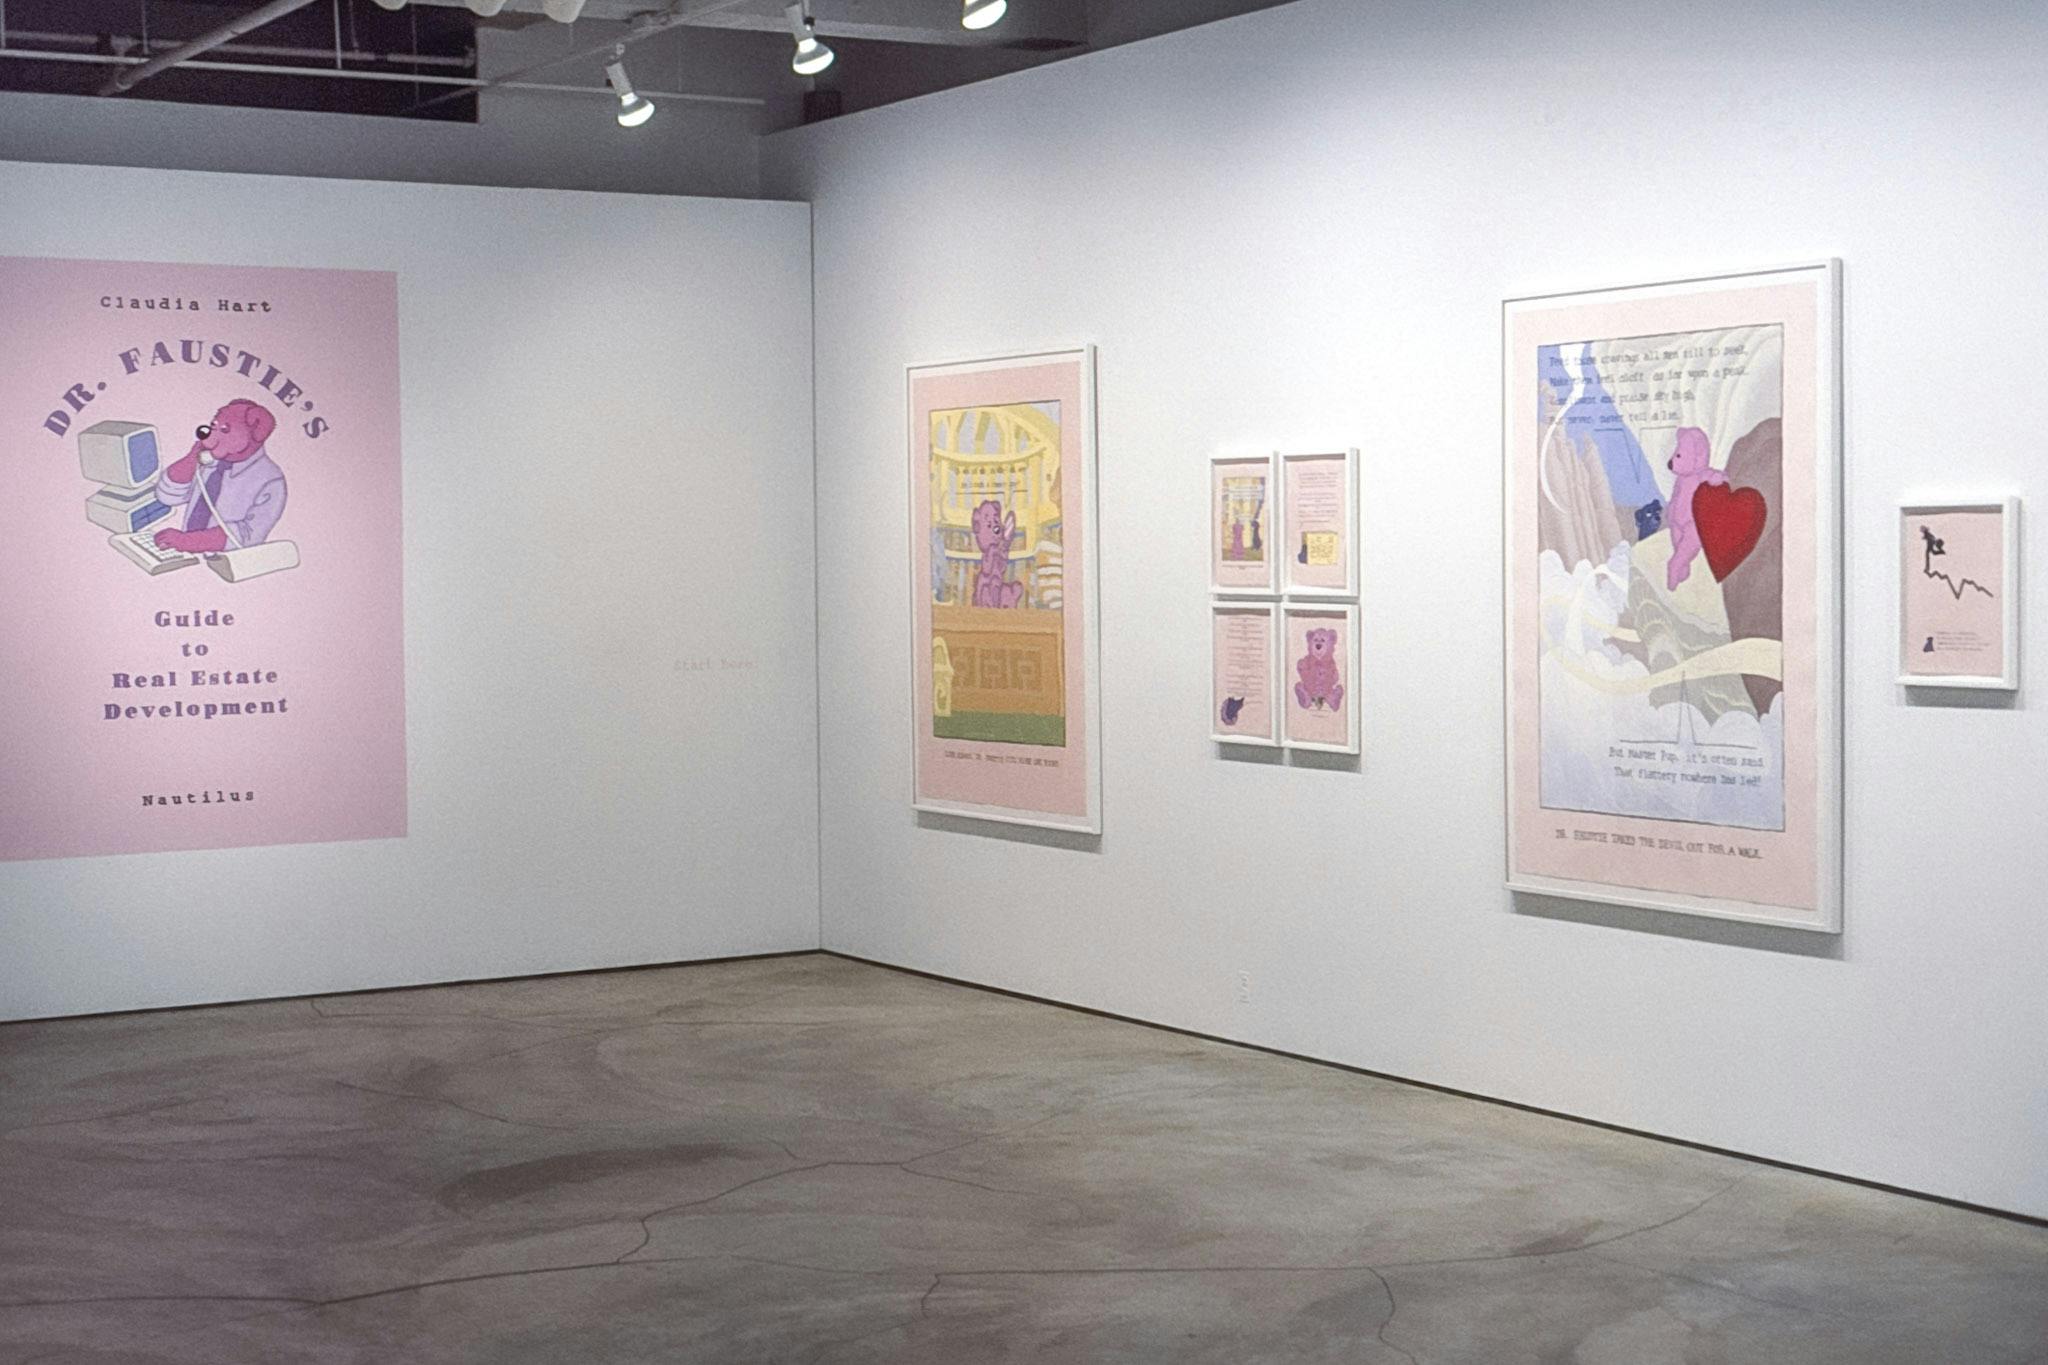 Eight works of drawing are mounted on the gallery walls. They vary in size but share the same light pink background. The style of drawing mimics comics: texts and pink bears appear in the squares.